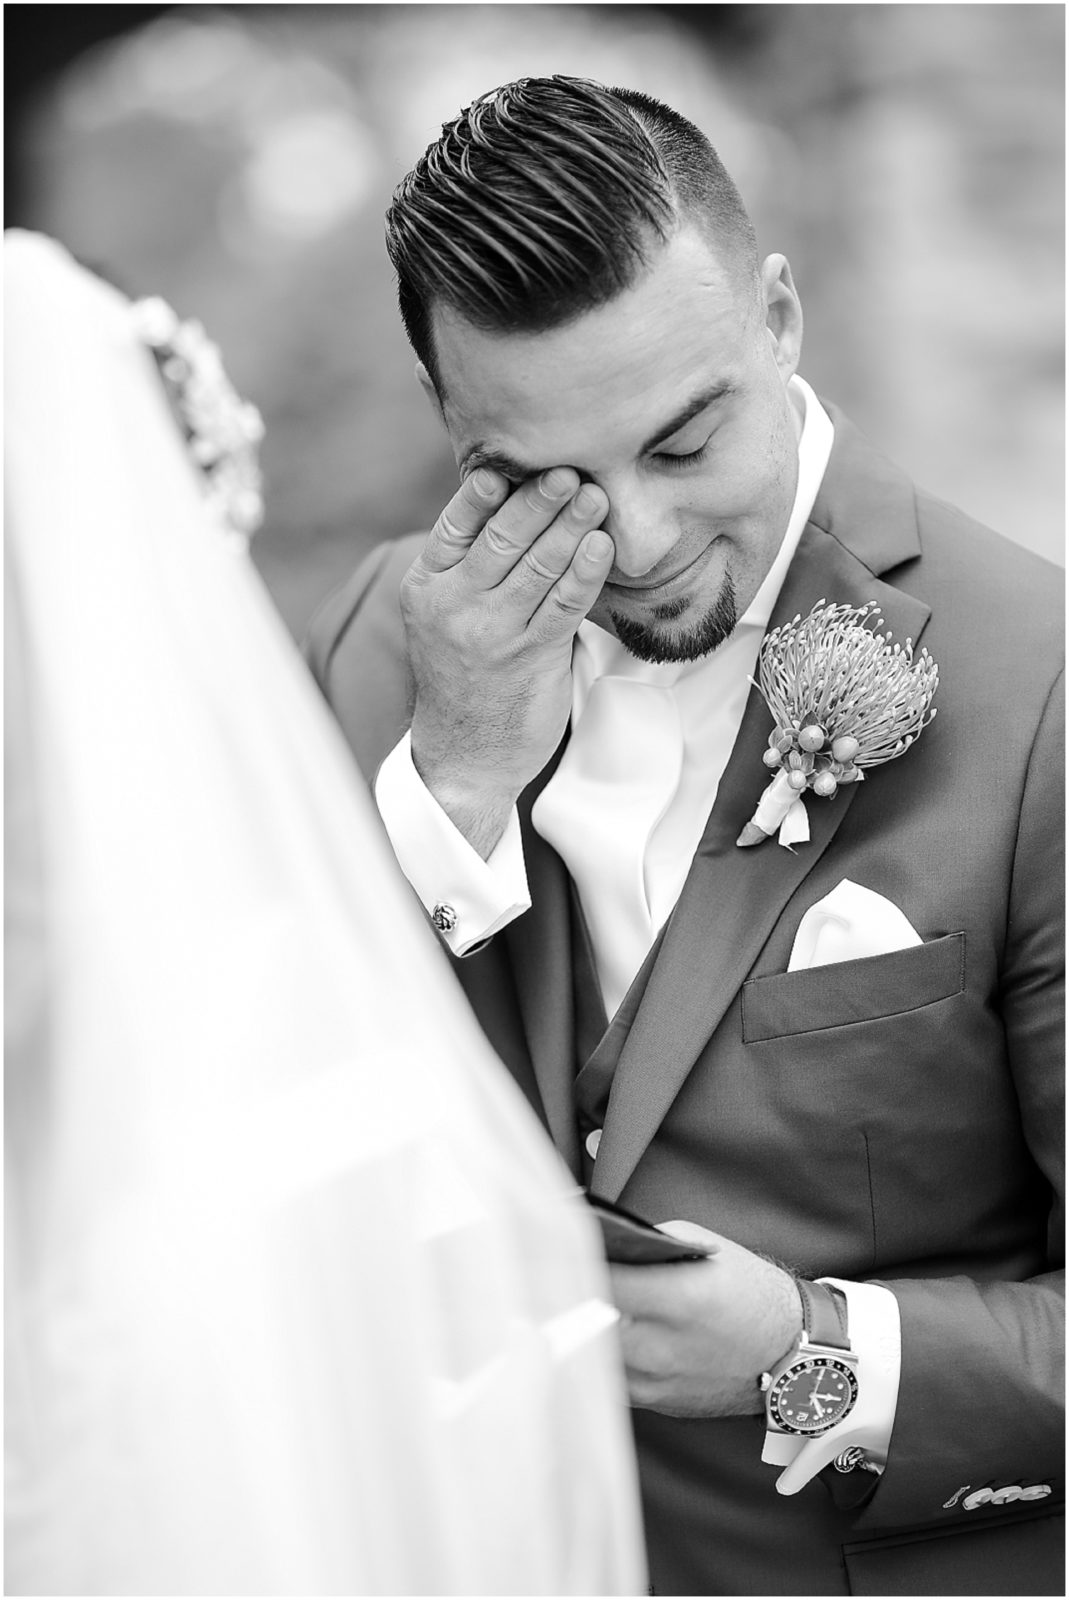 first look with bride and groom - groom is crying - rhapsody  - wiping tears